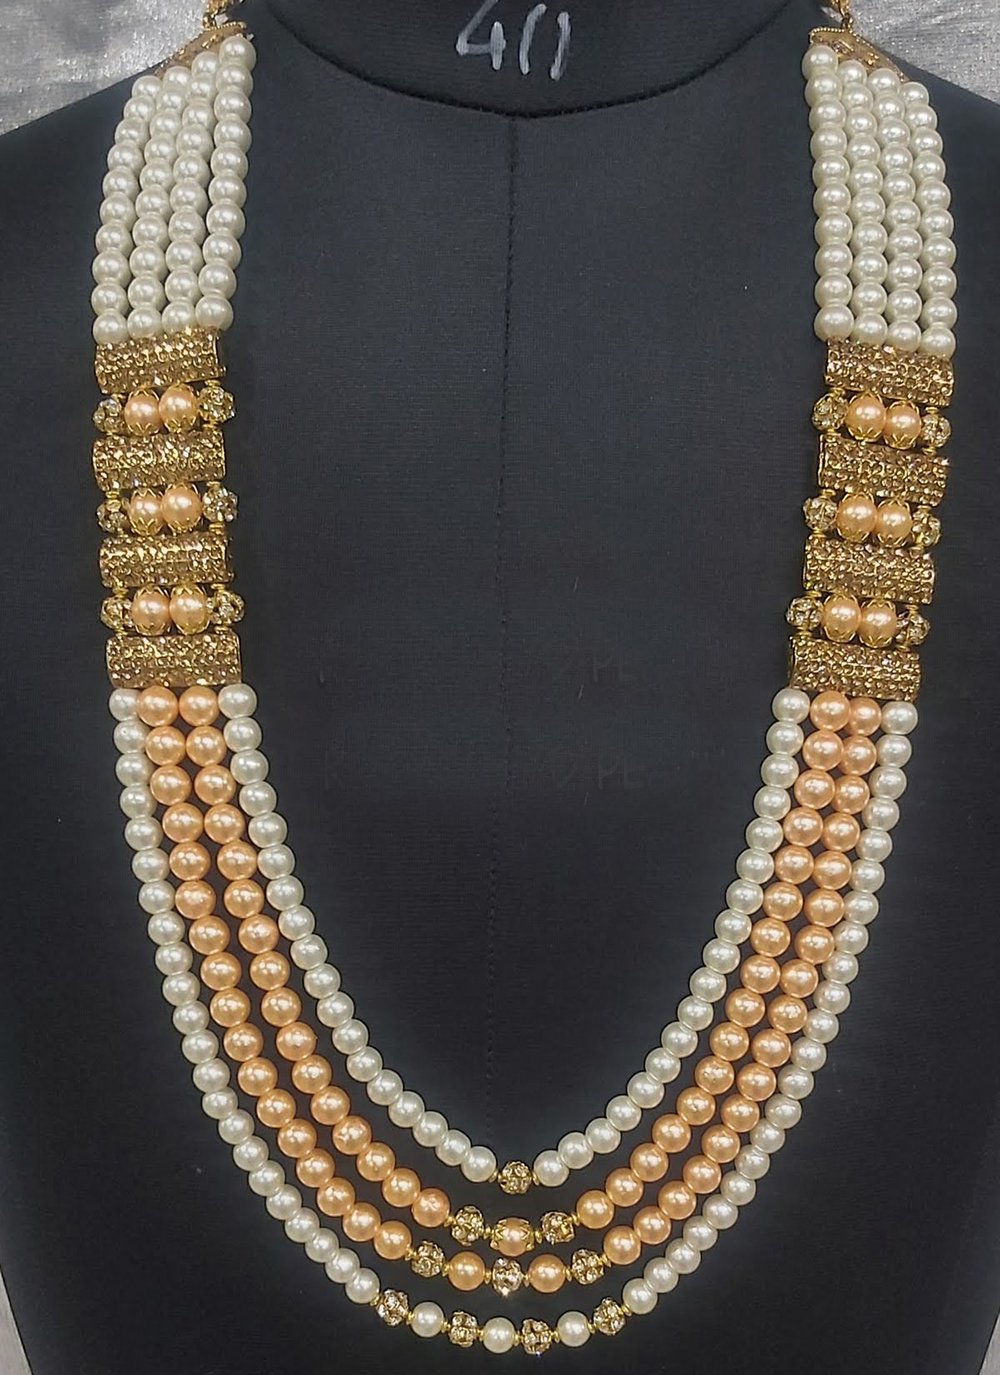 22CT GOLD MOTI NECKLACE SET... - Shree Ridhi Sidhi Jewellers | Facebook